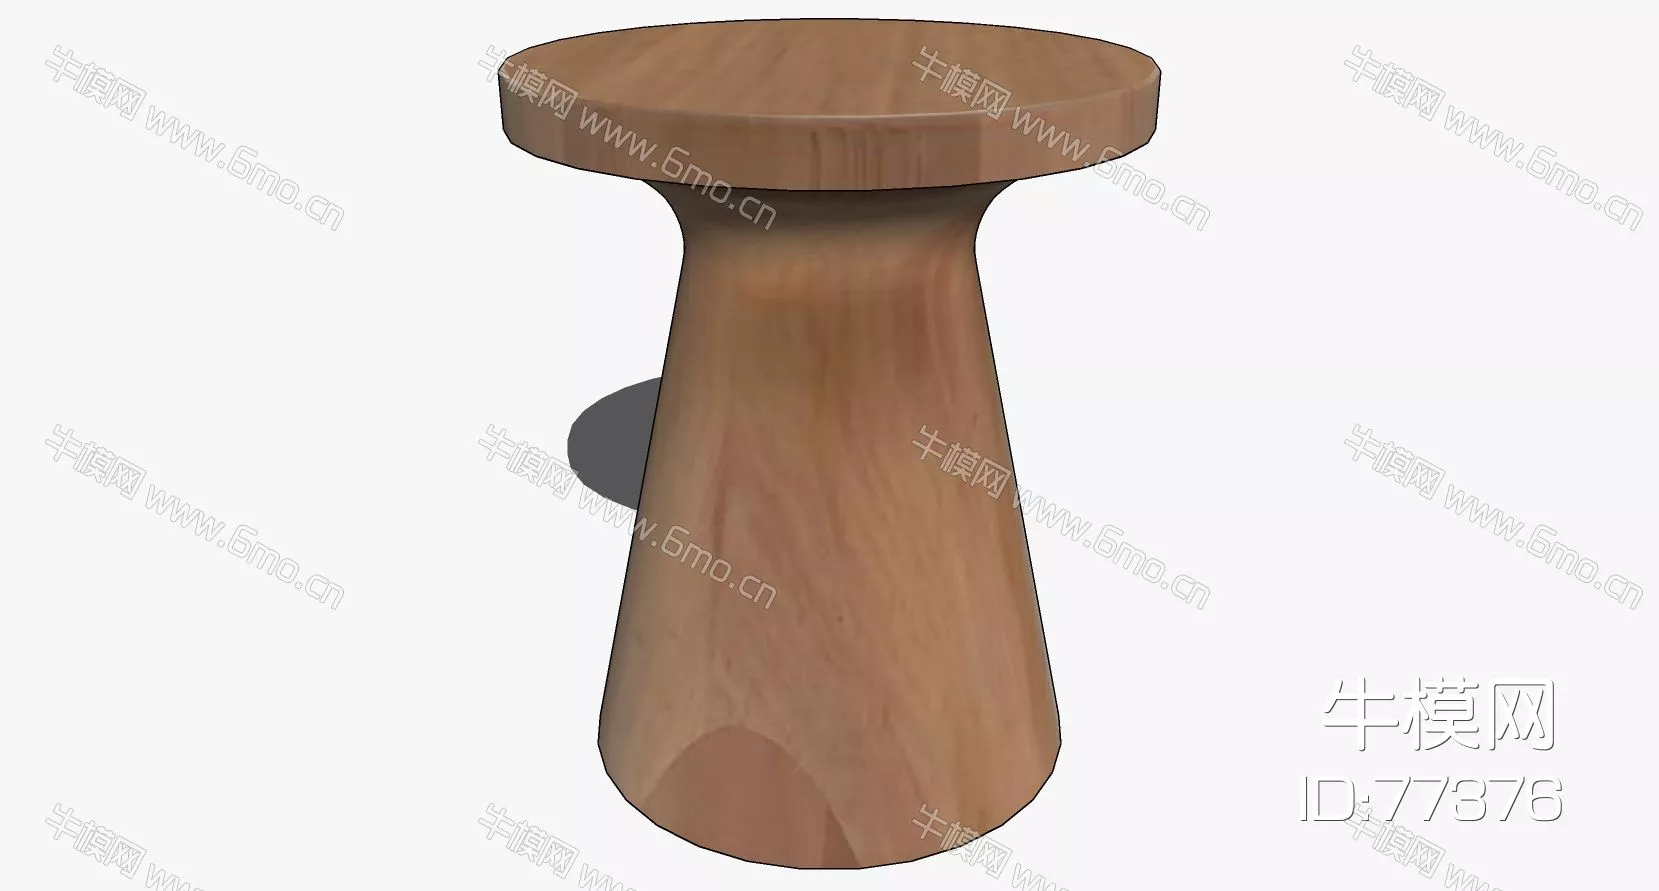 CHINESE SIDE TABLE - SKETCHUP 3D MODEL - ENSCAPE - 77376